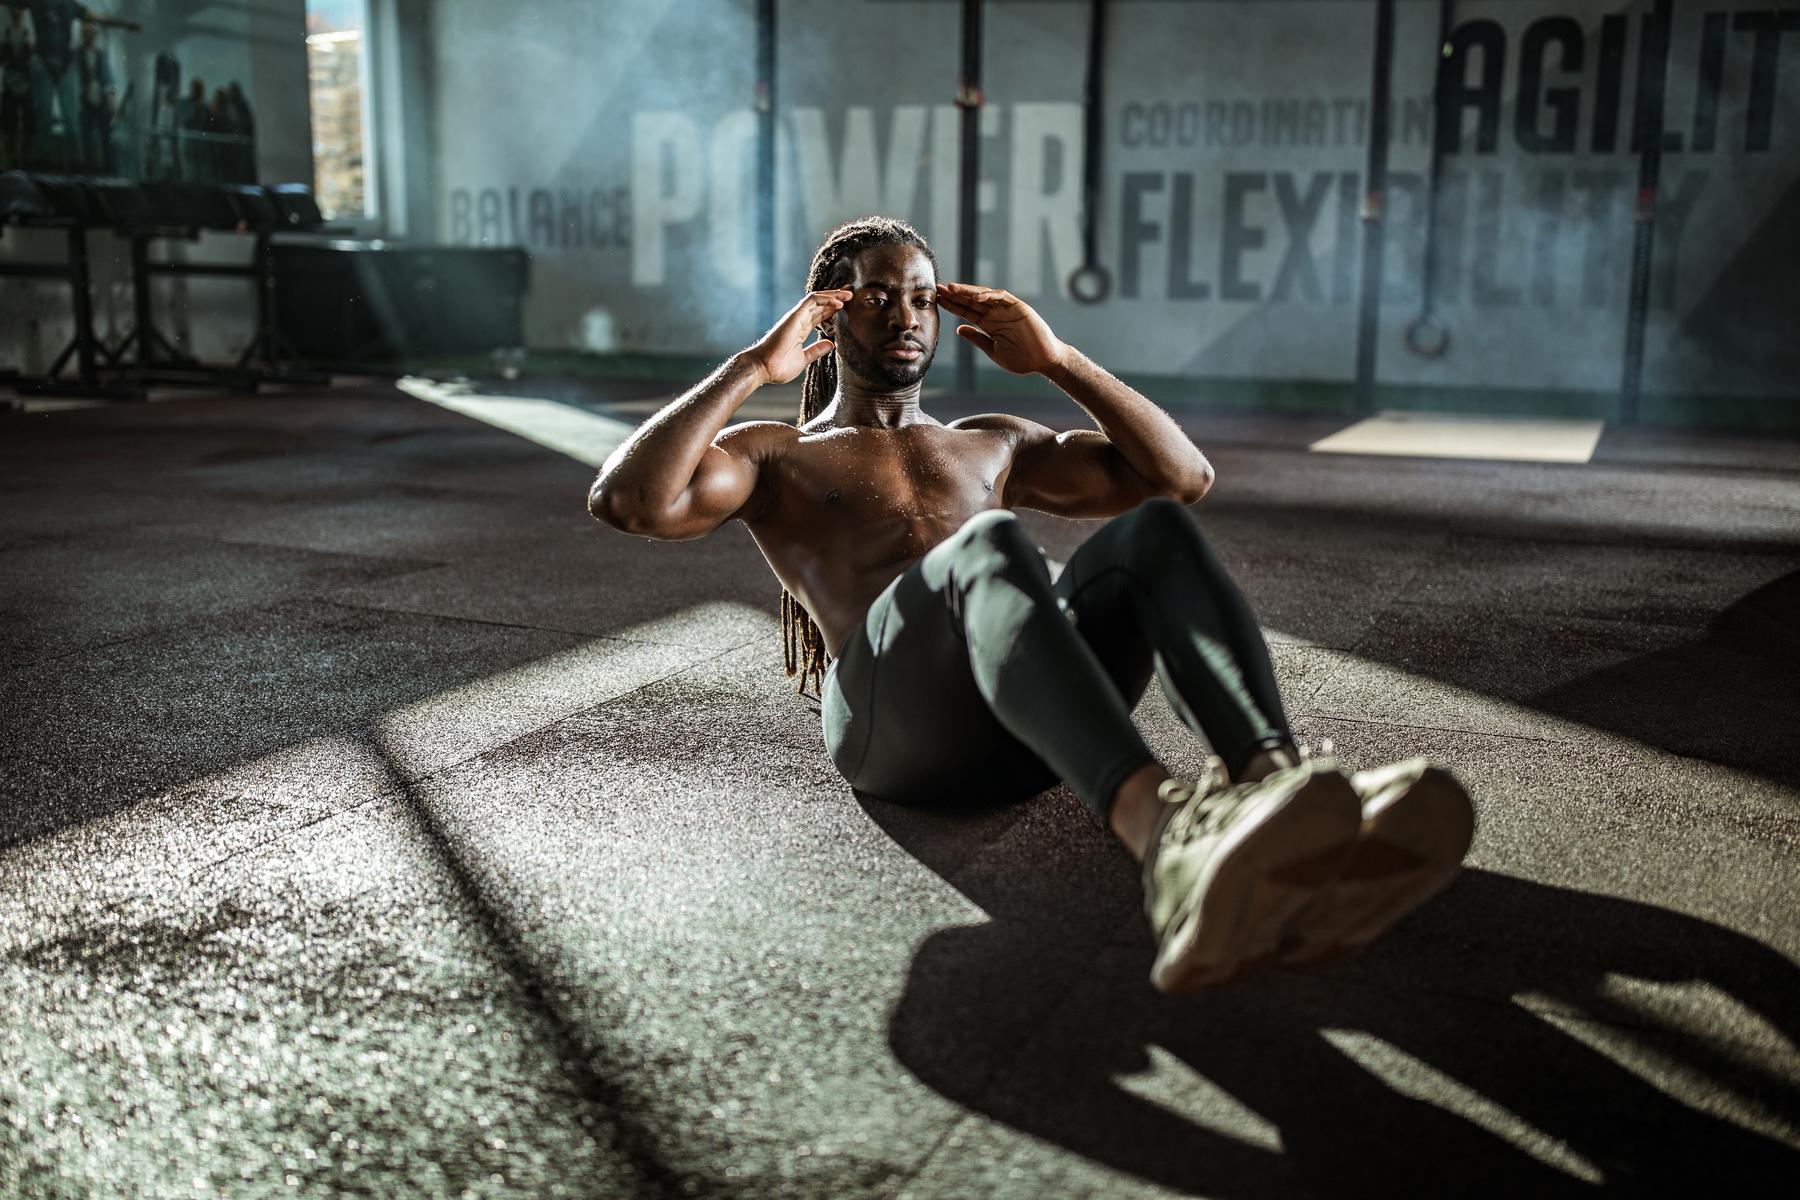 What Muscles Do Sit-Ups and Crunches Work?. Nike UK